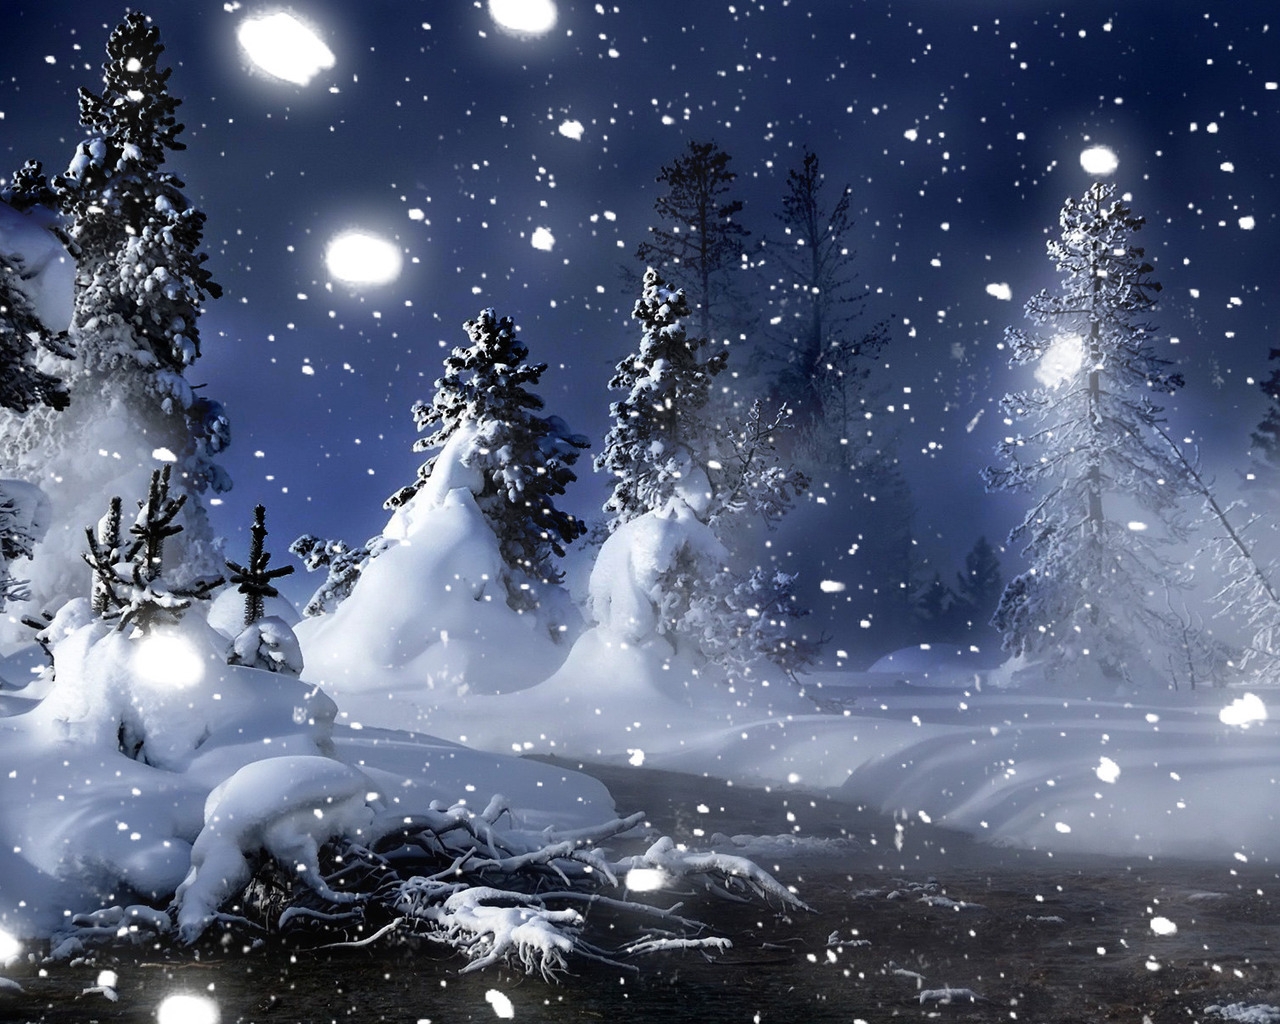 Winter Night in Park for 1280 x 1024 resolution